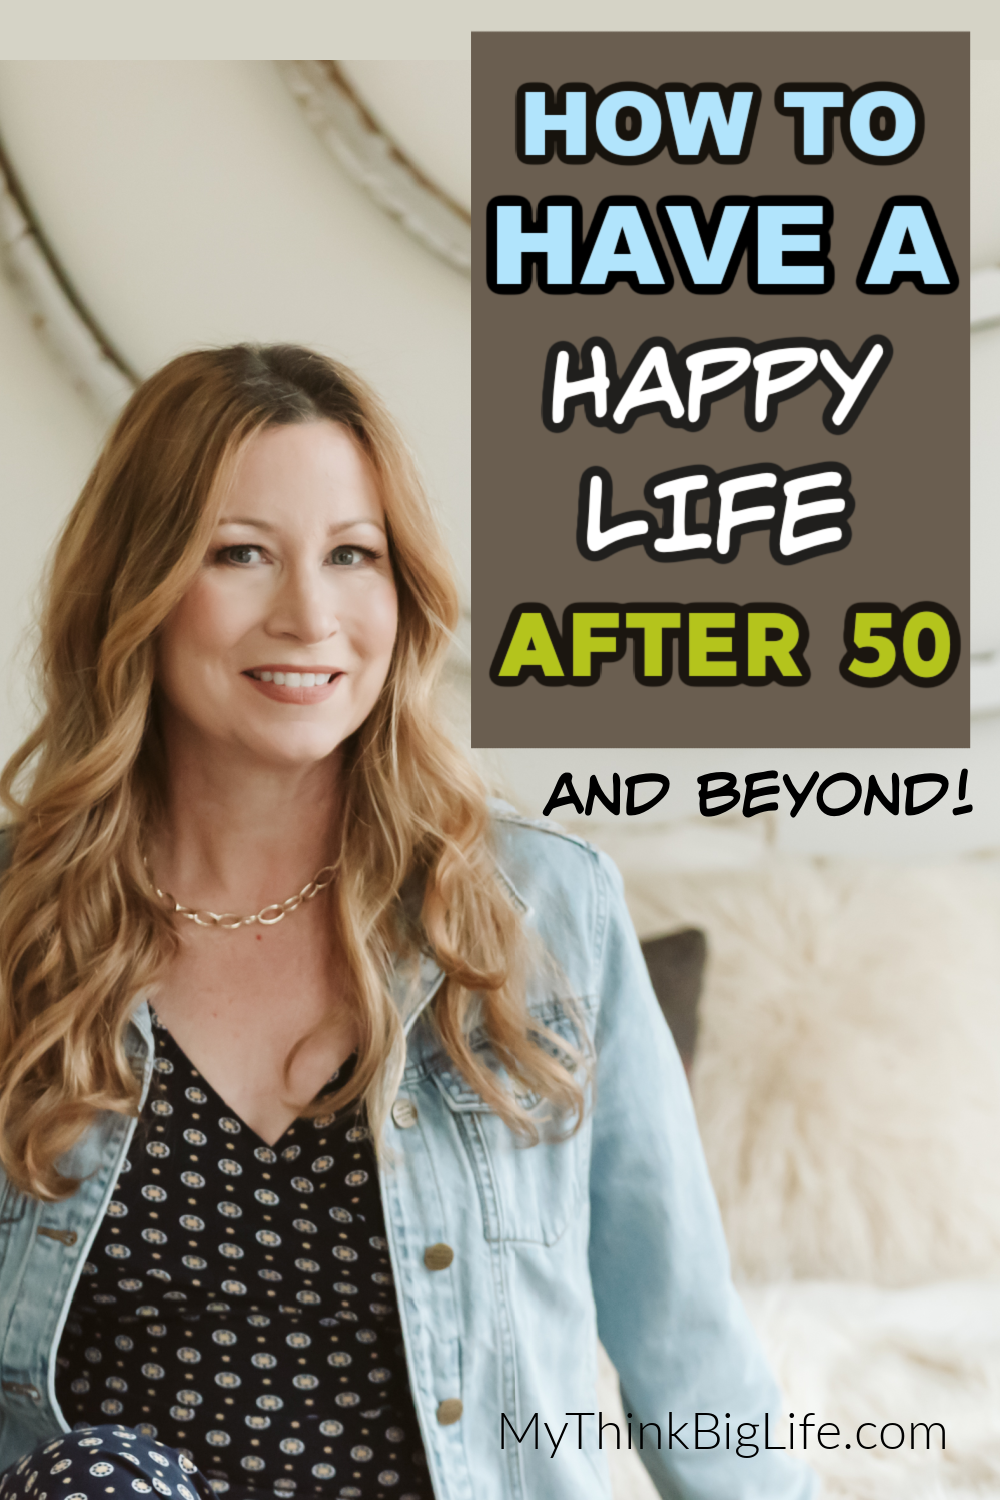 Picture of Sara with words: How to Have a Happy Life After 50 and beyond.